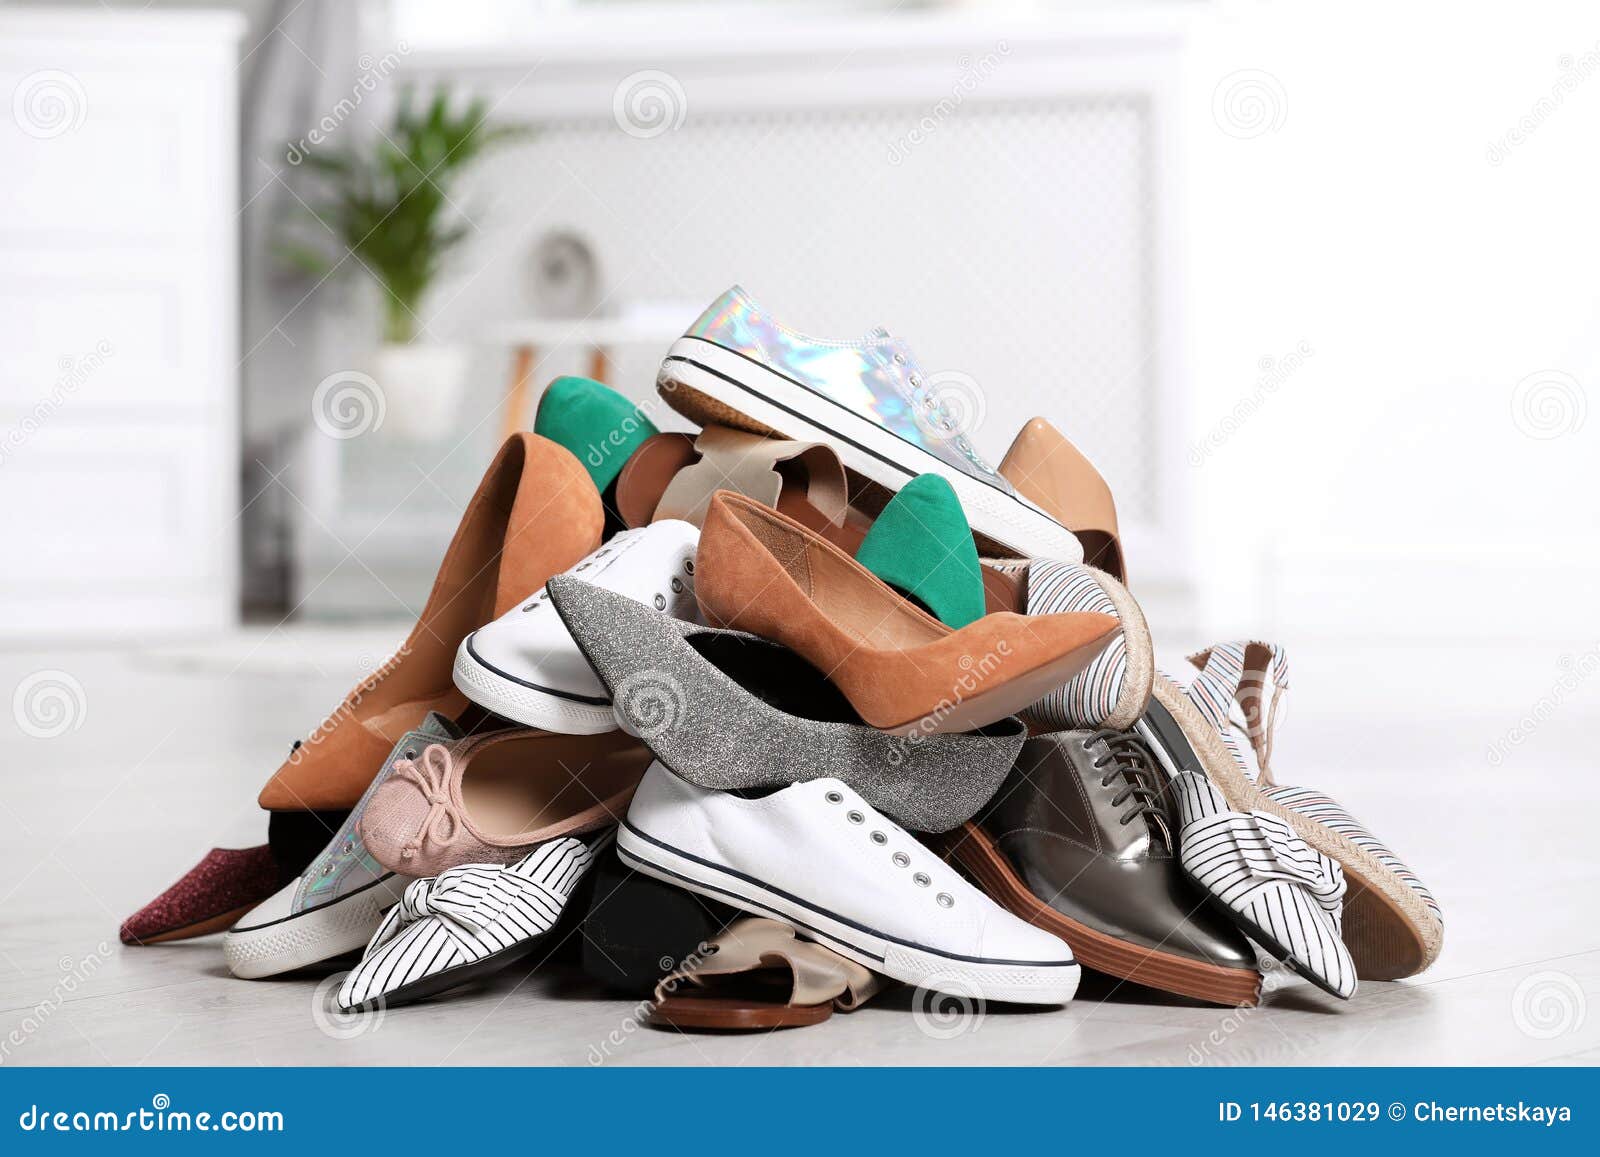 Pile of Female Shoes on Floor Stock Image - Image of modern, sandals ...